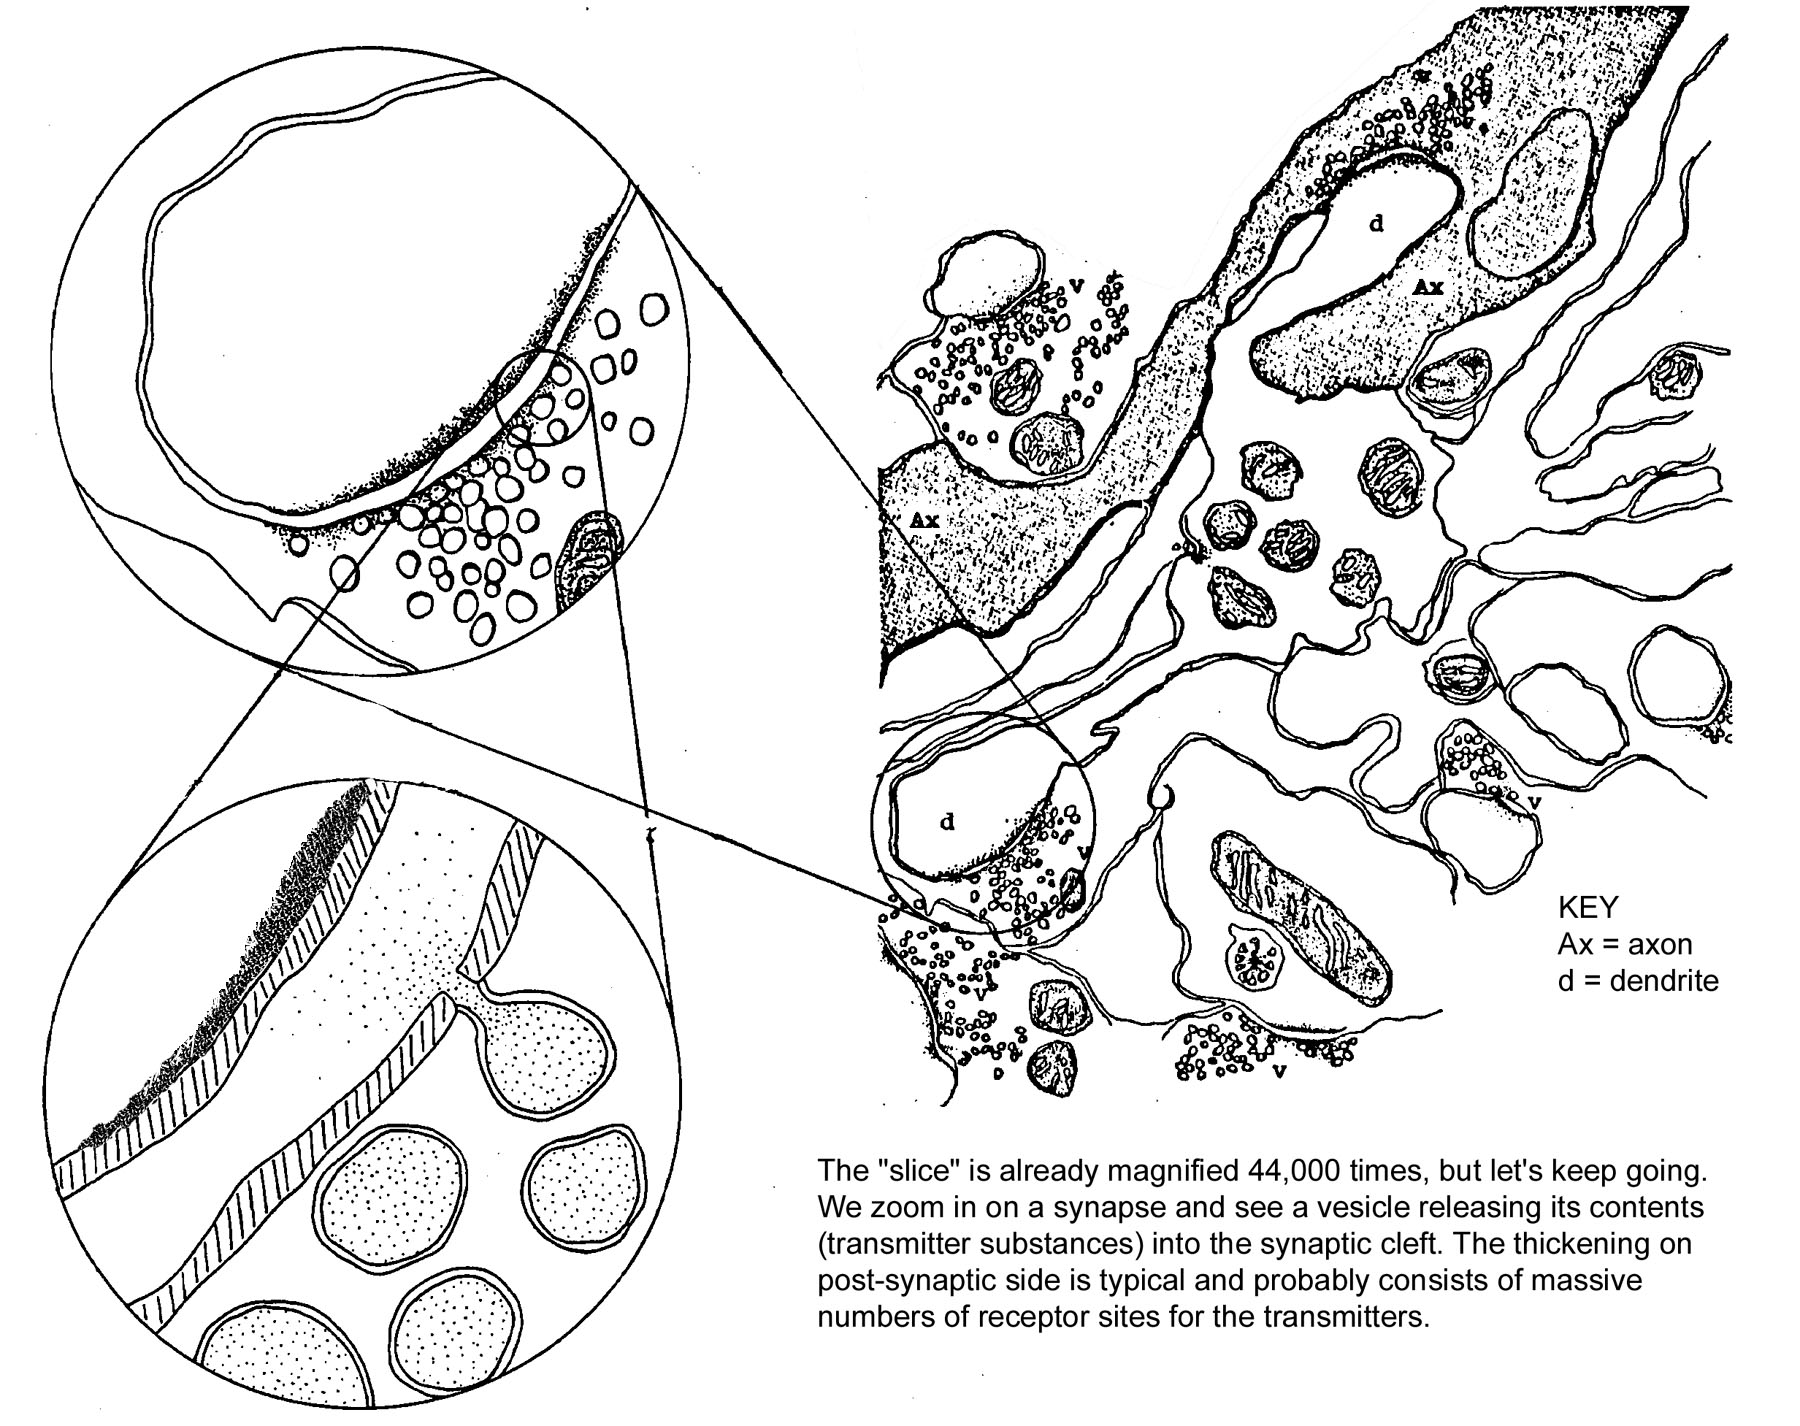 Vesicles are pictured